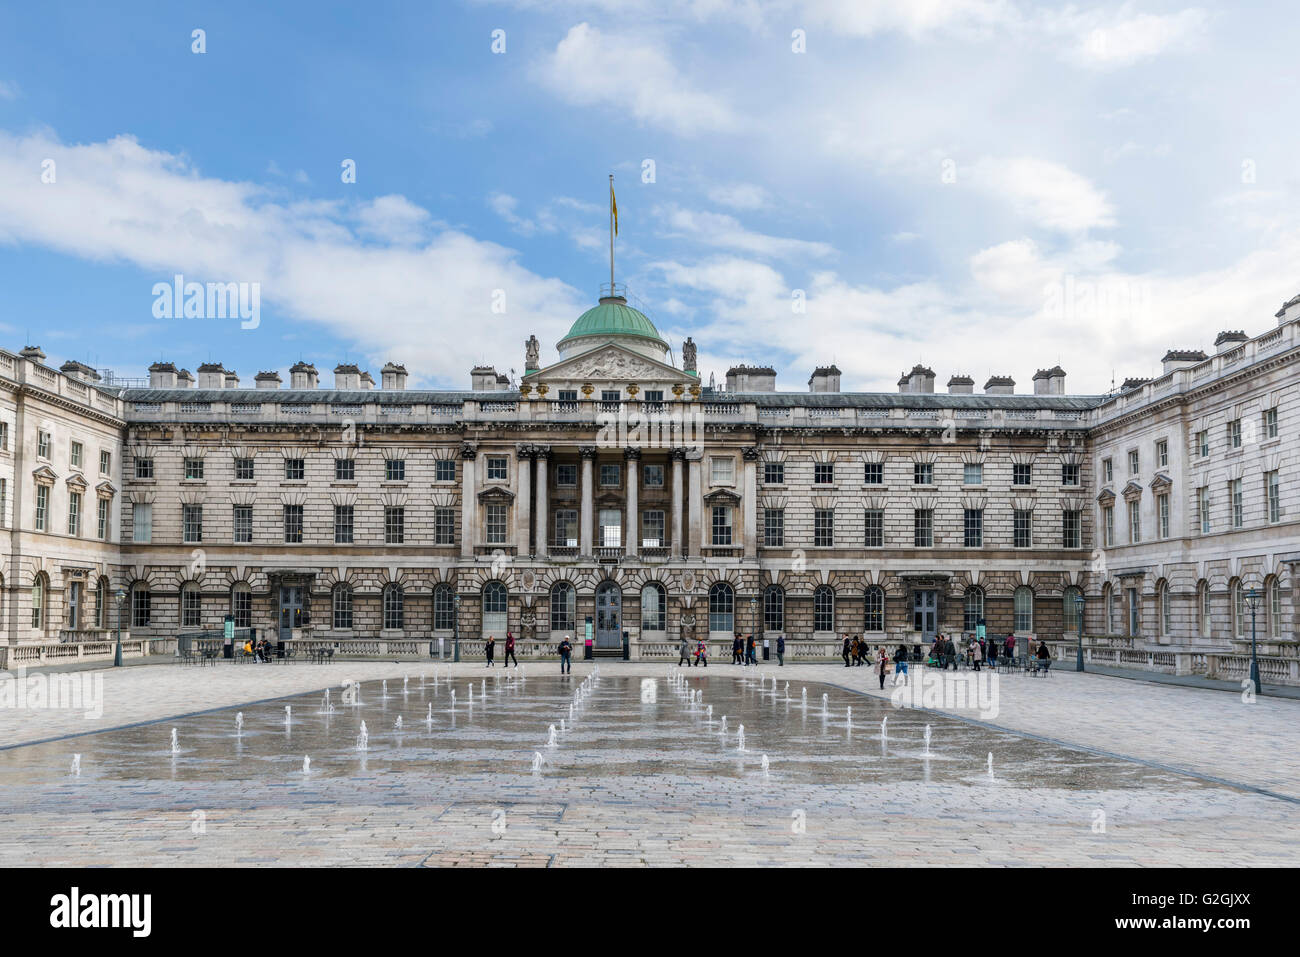 The Fountain Court at Somerset House, London, England, UK Stock Photo